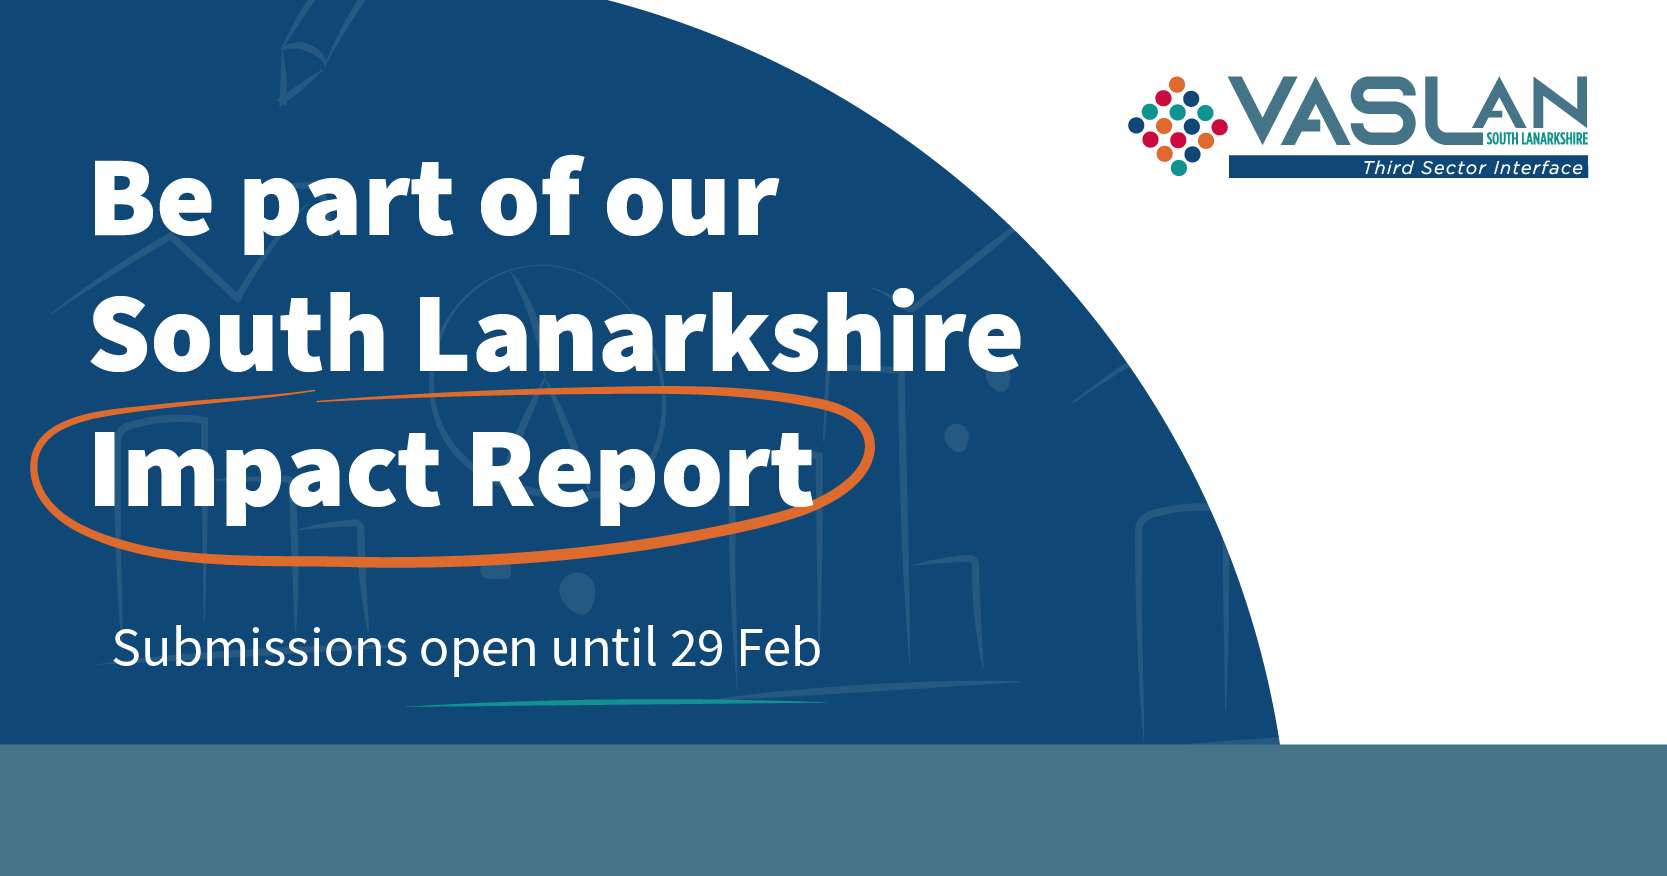 Be part of our South Lanarkshire Impact Report